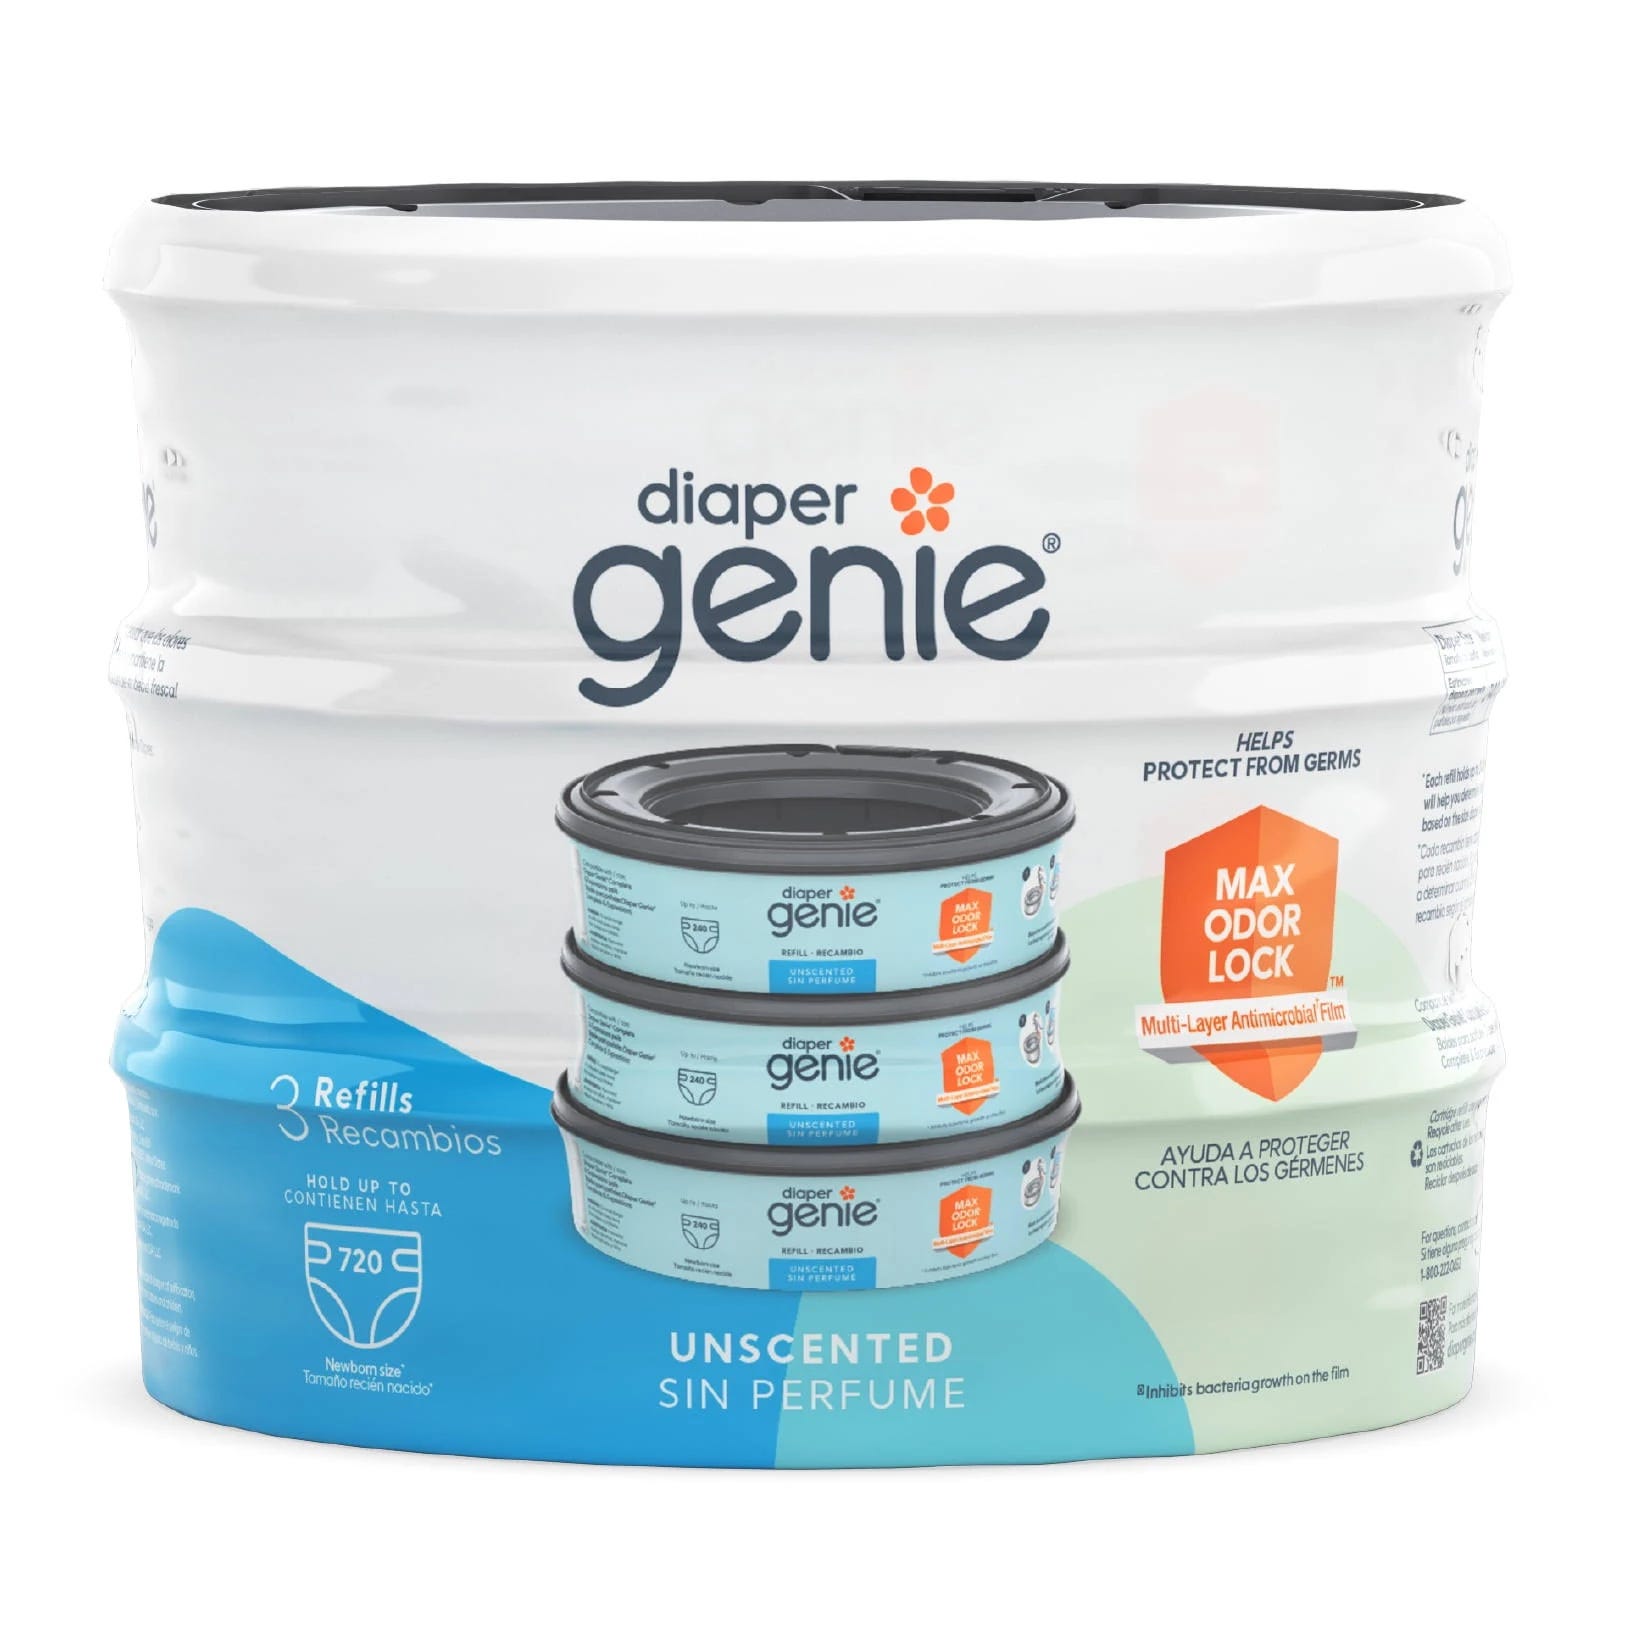 Diaper Genie Unscented Refills for 720 Diapers | Image